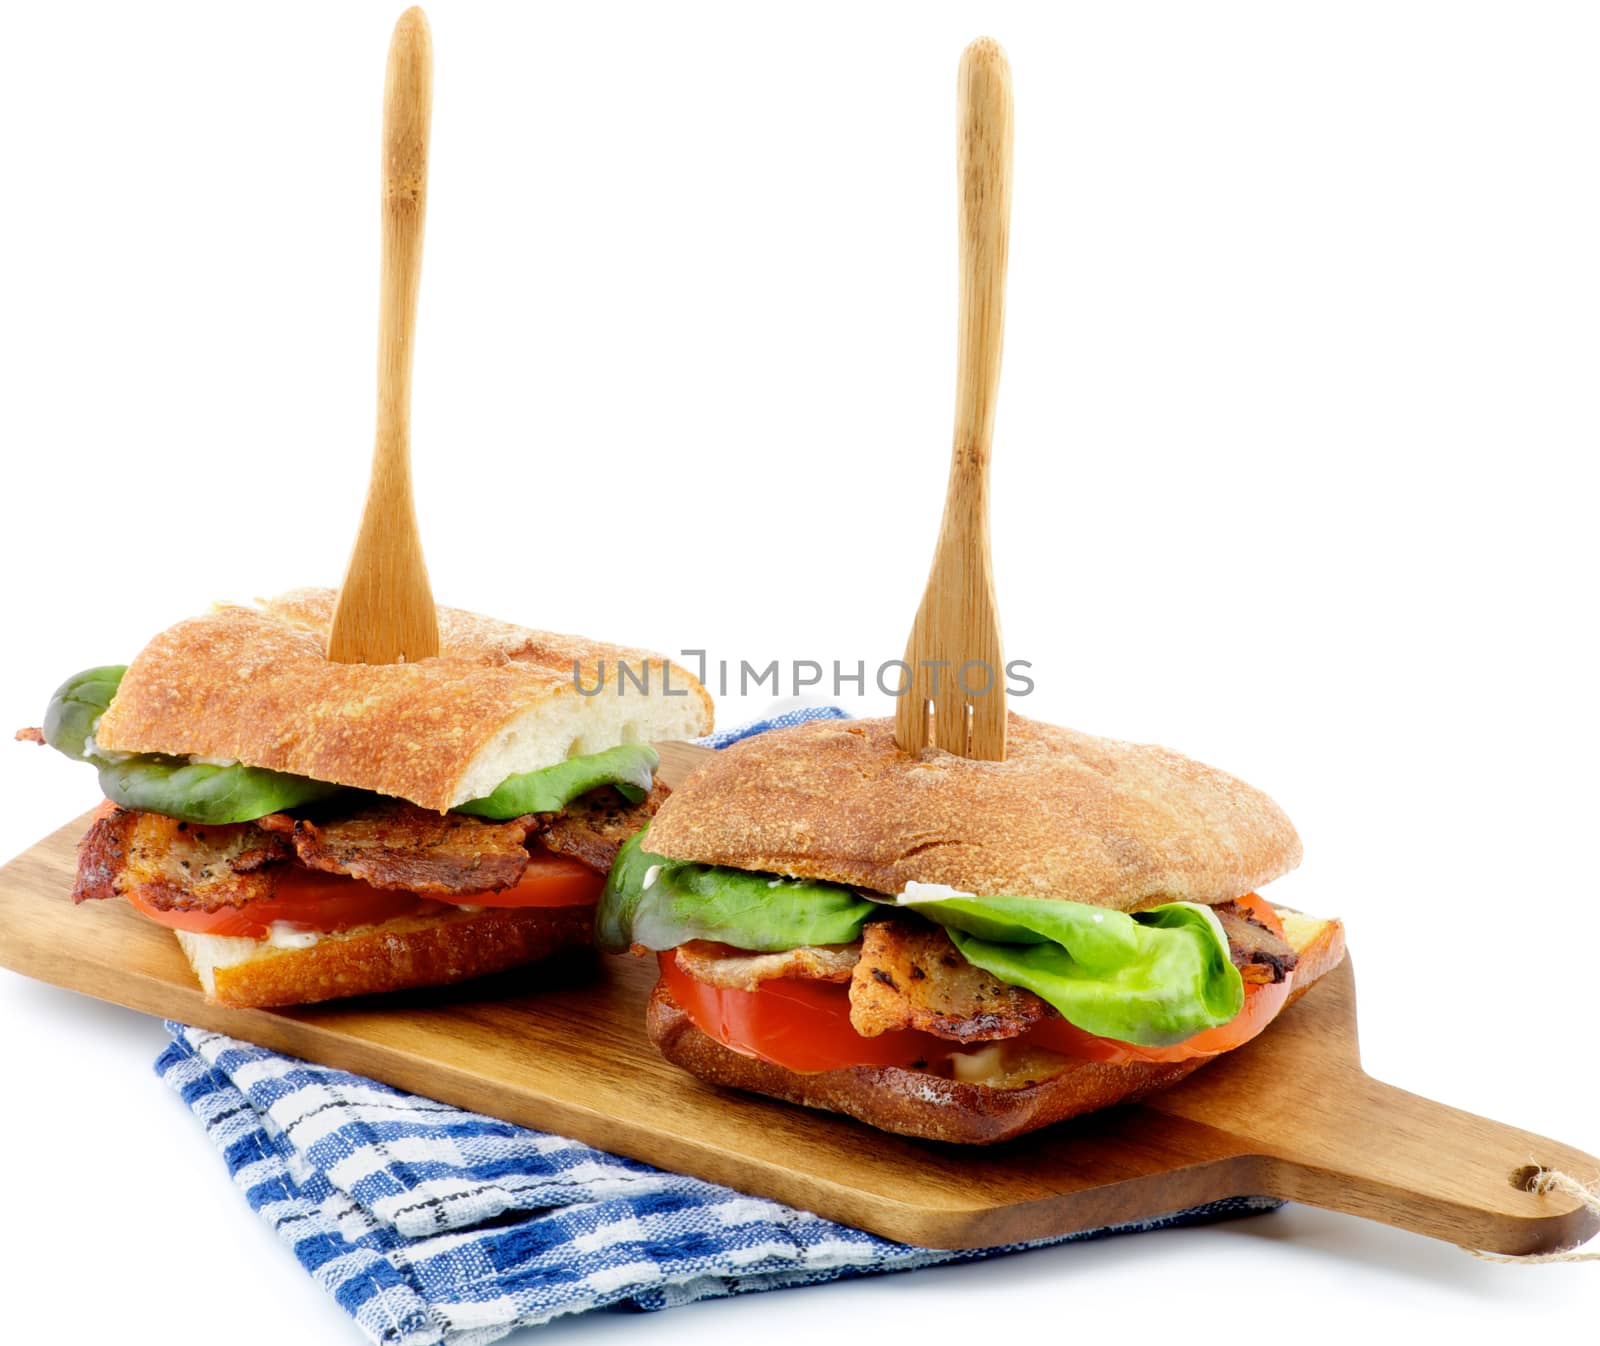 Ciabatta Sandwiches with Bacon, Tomato, Lettuce and Sauces on Cutting Board Arranged with Wooden Fork closeup on white background